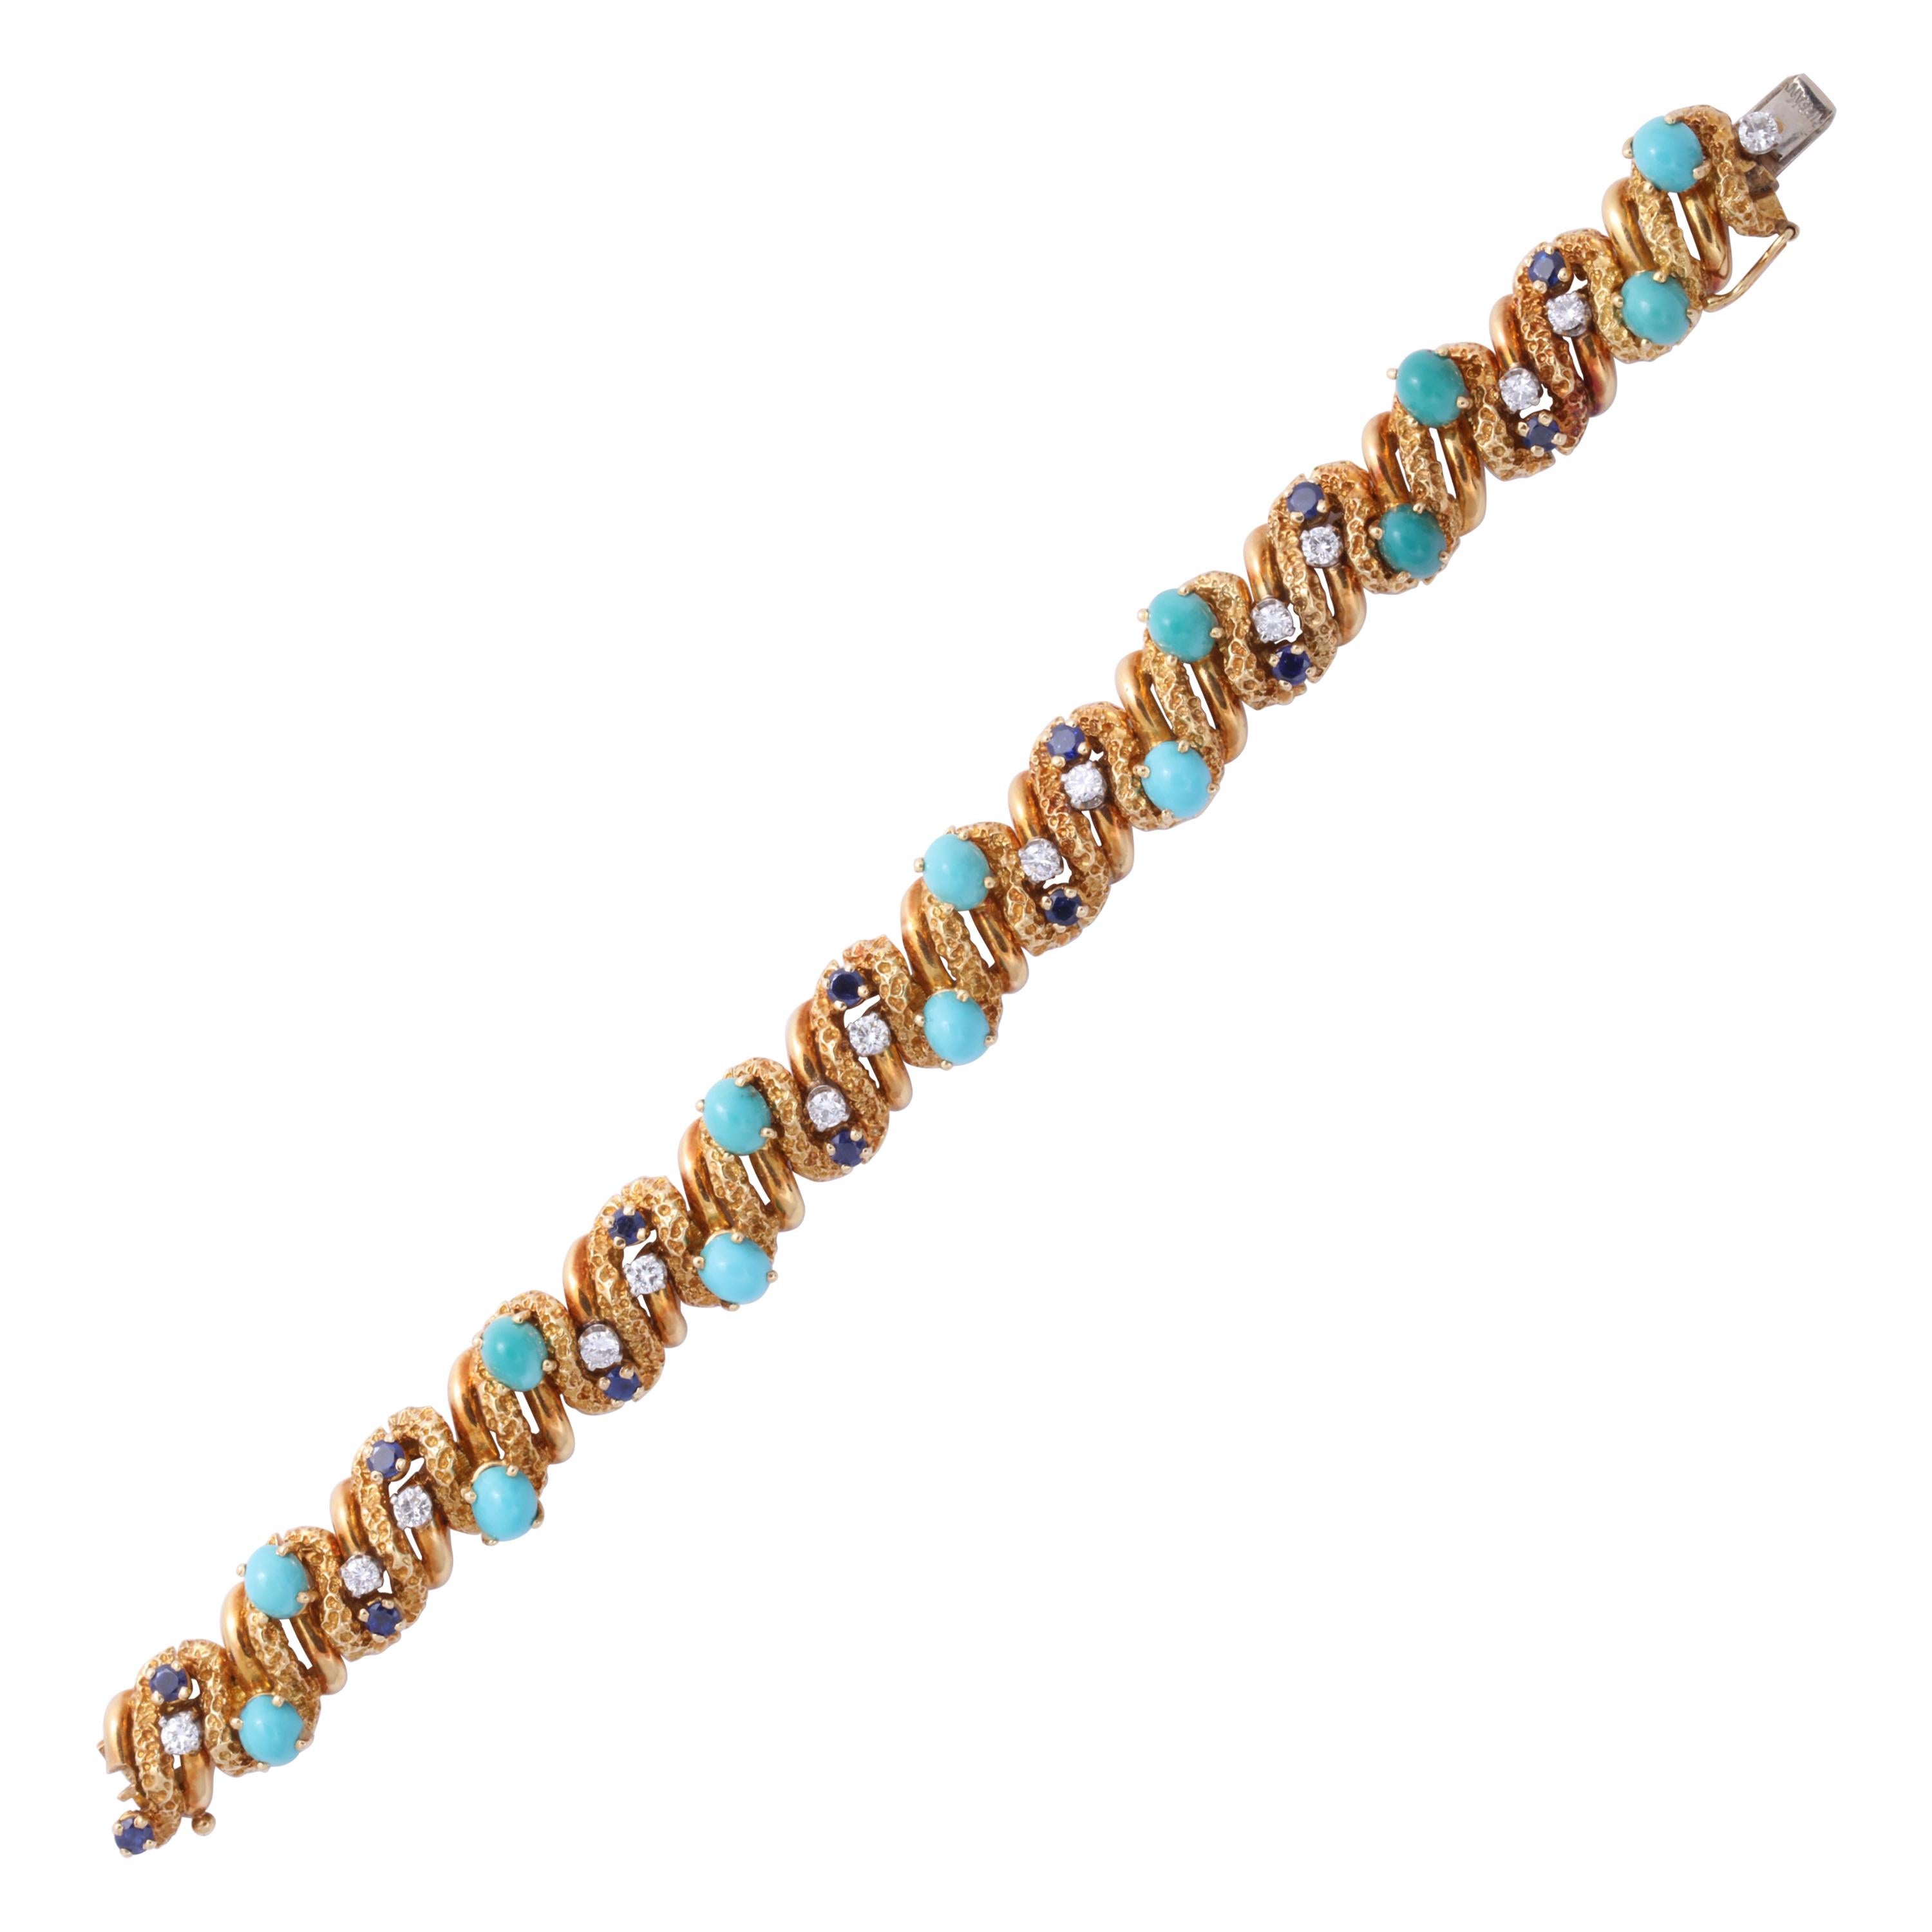 Tiffany & Co. Gold, Turquoise, Faceted Sapphire and Diamond Bracelet